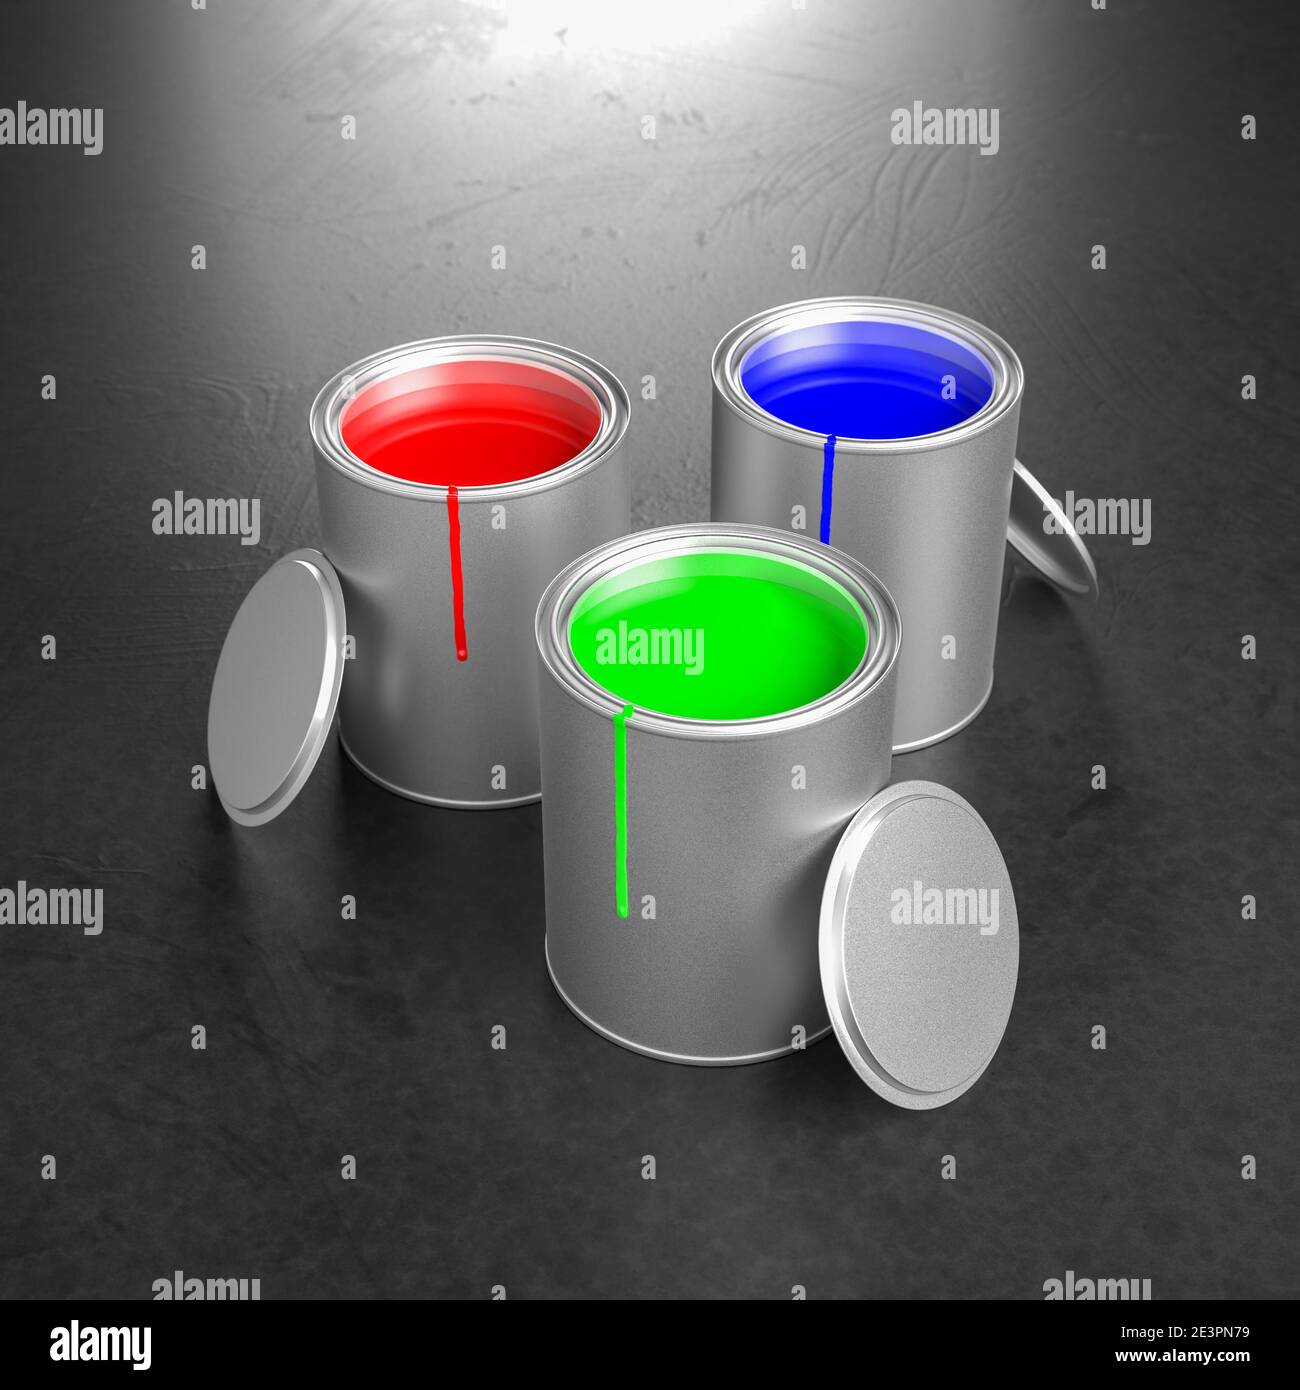 Paint pots with the RGB primary colors of the additive color model: Red, green, blue. Color stains on the pots, lids leaned to the pots. Stock Photo